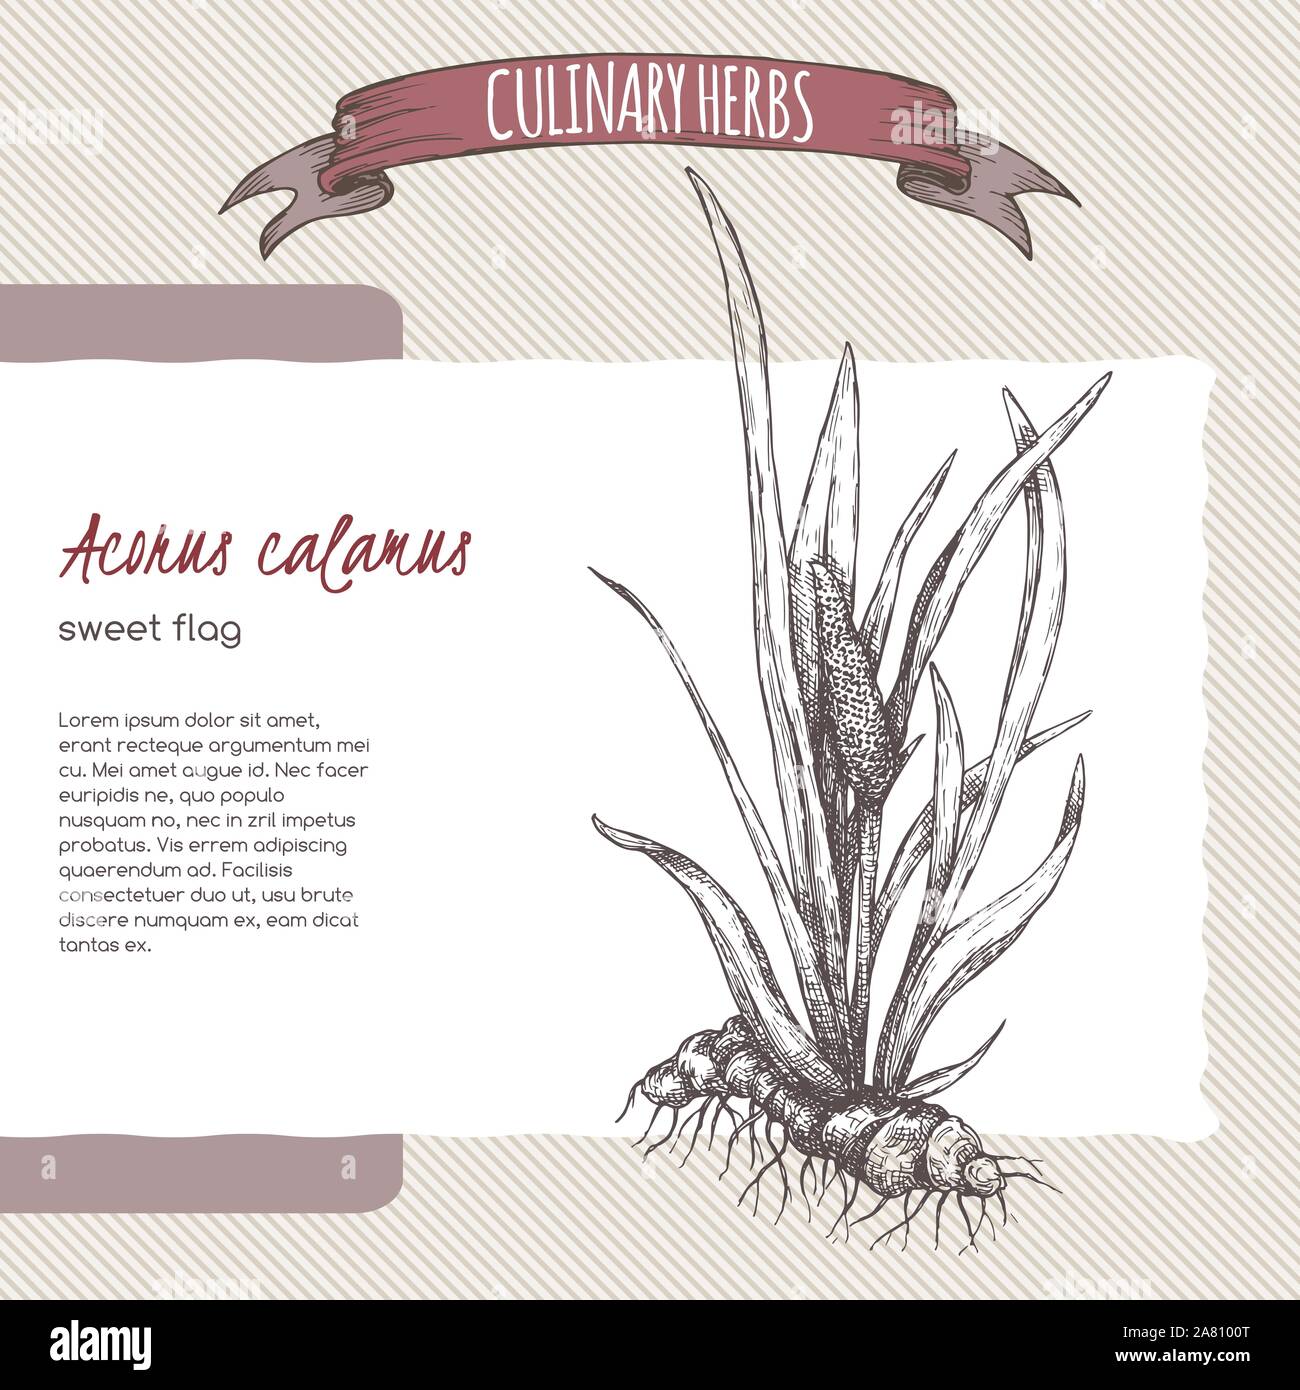 Acorus calamus aka sweet flag sketch. Culinary herbs series. Great for traditional medicine, perfume design, cooking or gardening. Stock Vector